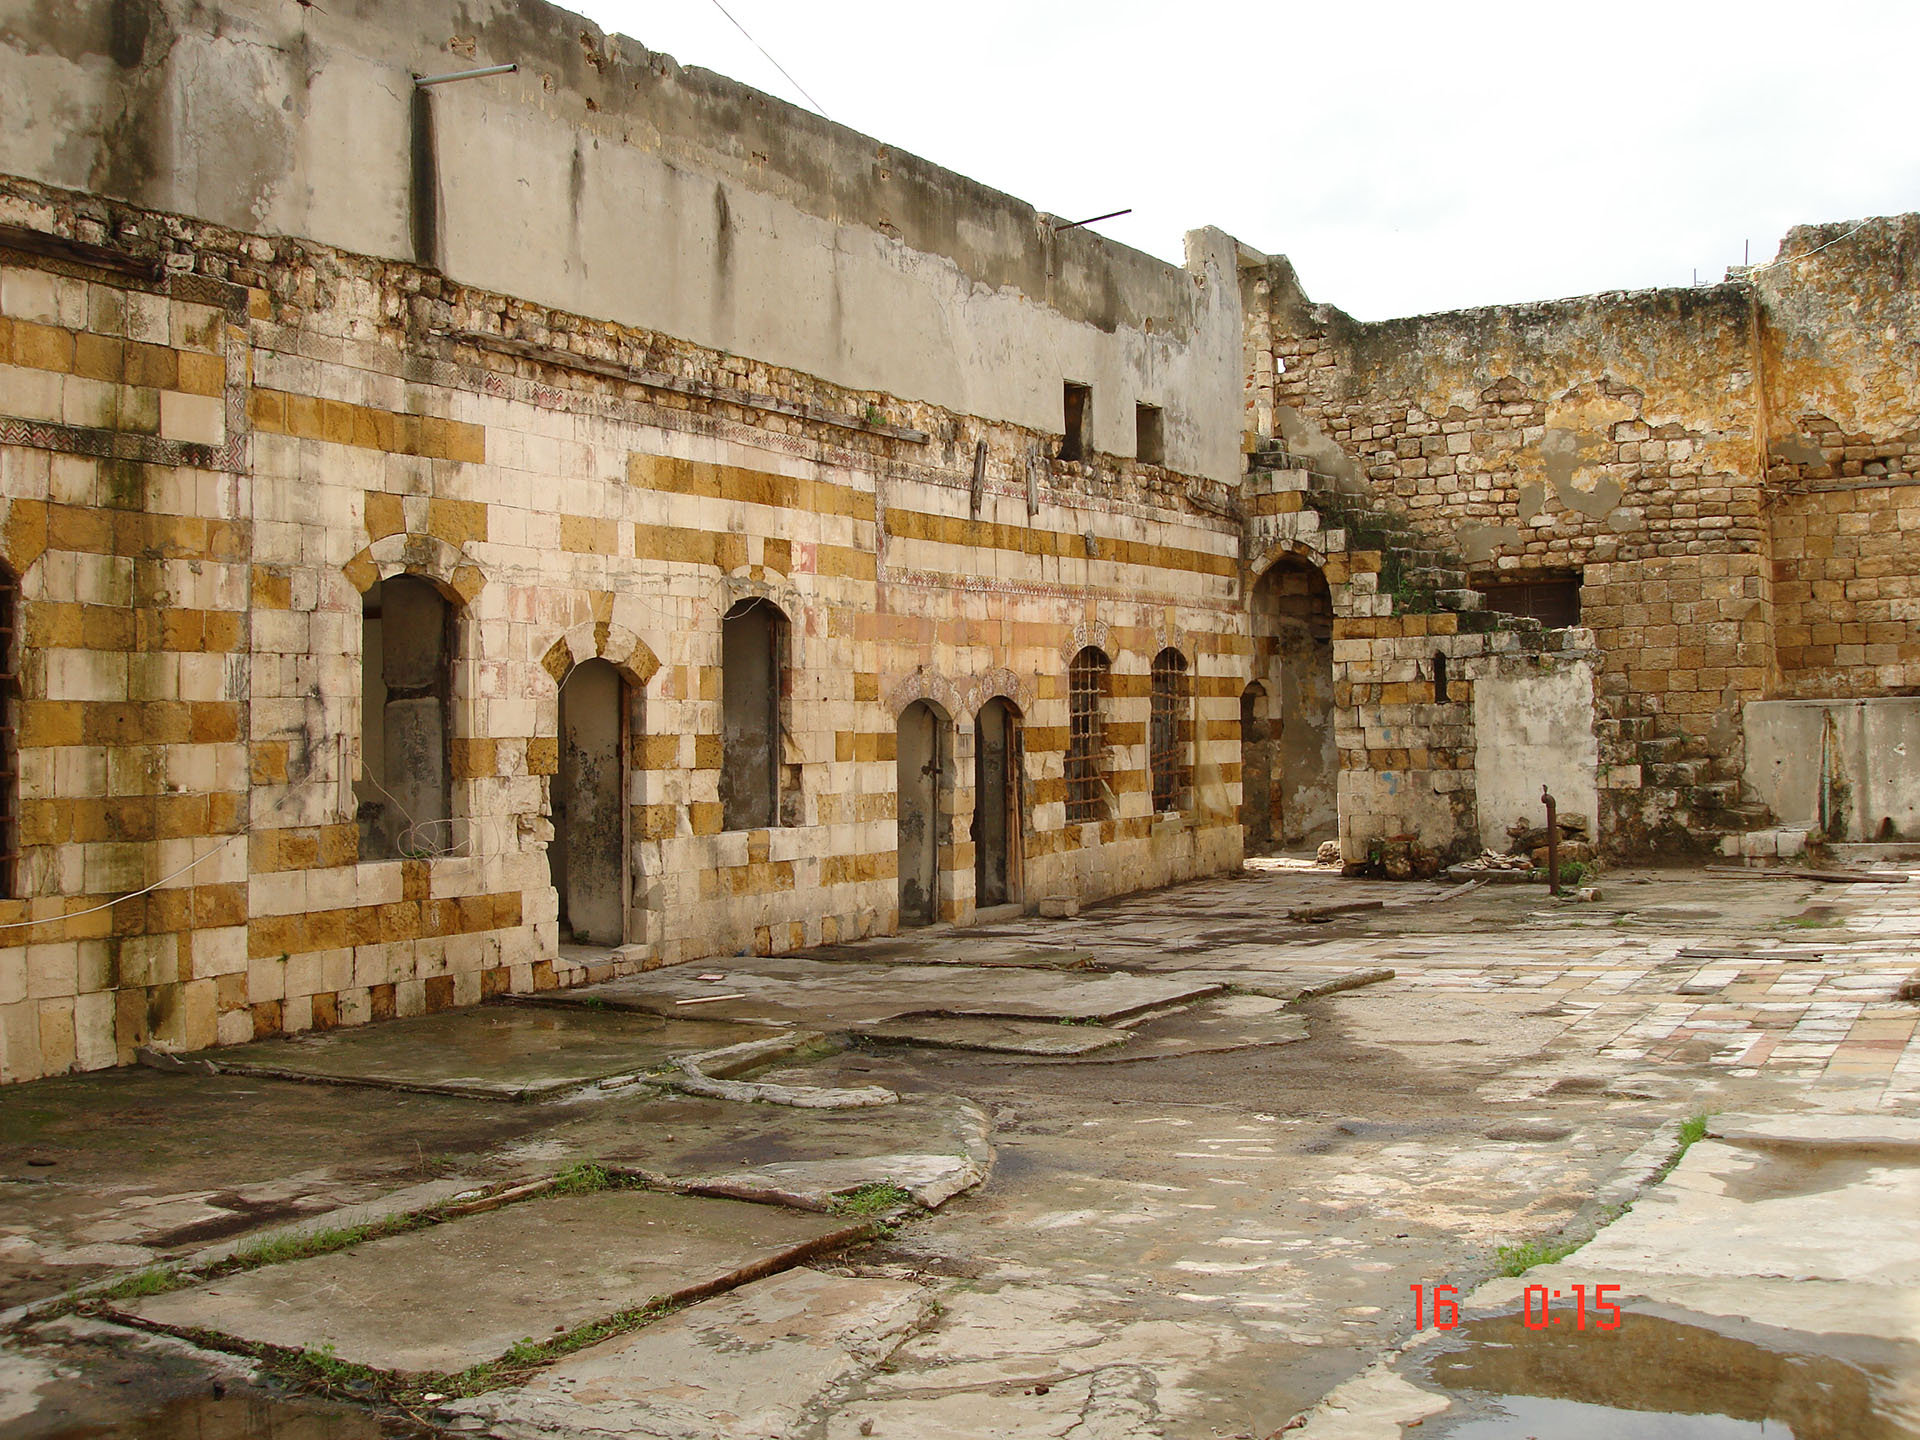 <p>Sahn (courtyard) before its restoration. The residence dates from 1730 and was used as a school from 1850; it was abandoned during the mid-20th century and later used for informal emergency housing during the civil war.</p>